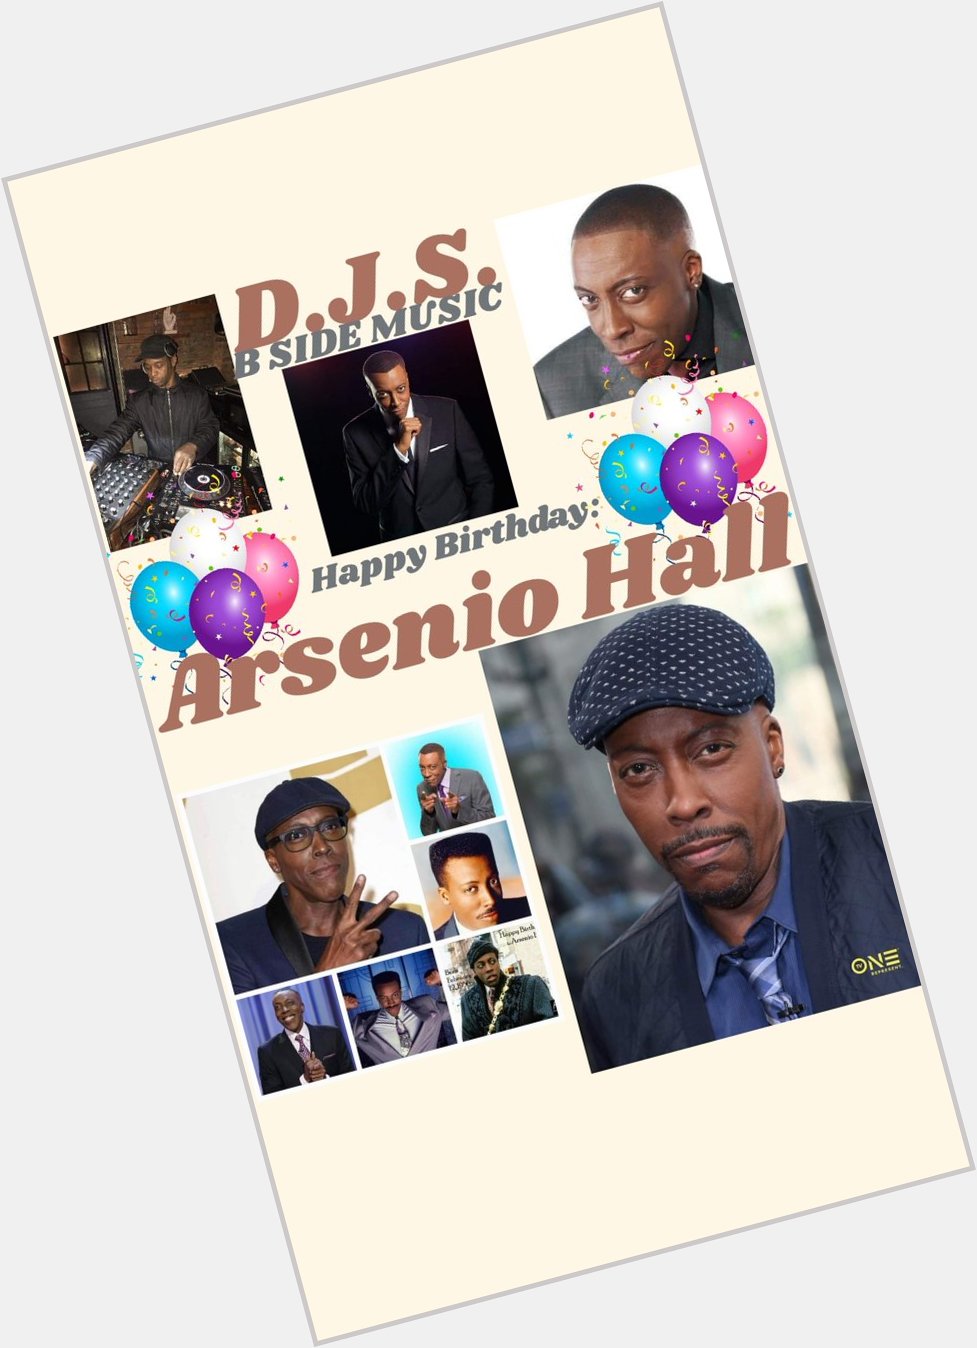 I(D.J.S.) saying Happy Birthday to Actor/Comedian/Talk Show Personality, \"ARSENIO HALL\"!!! 